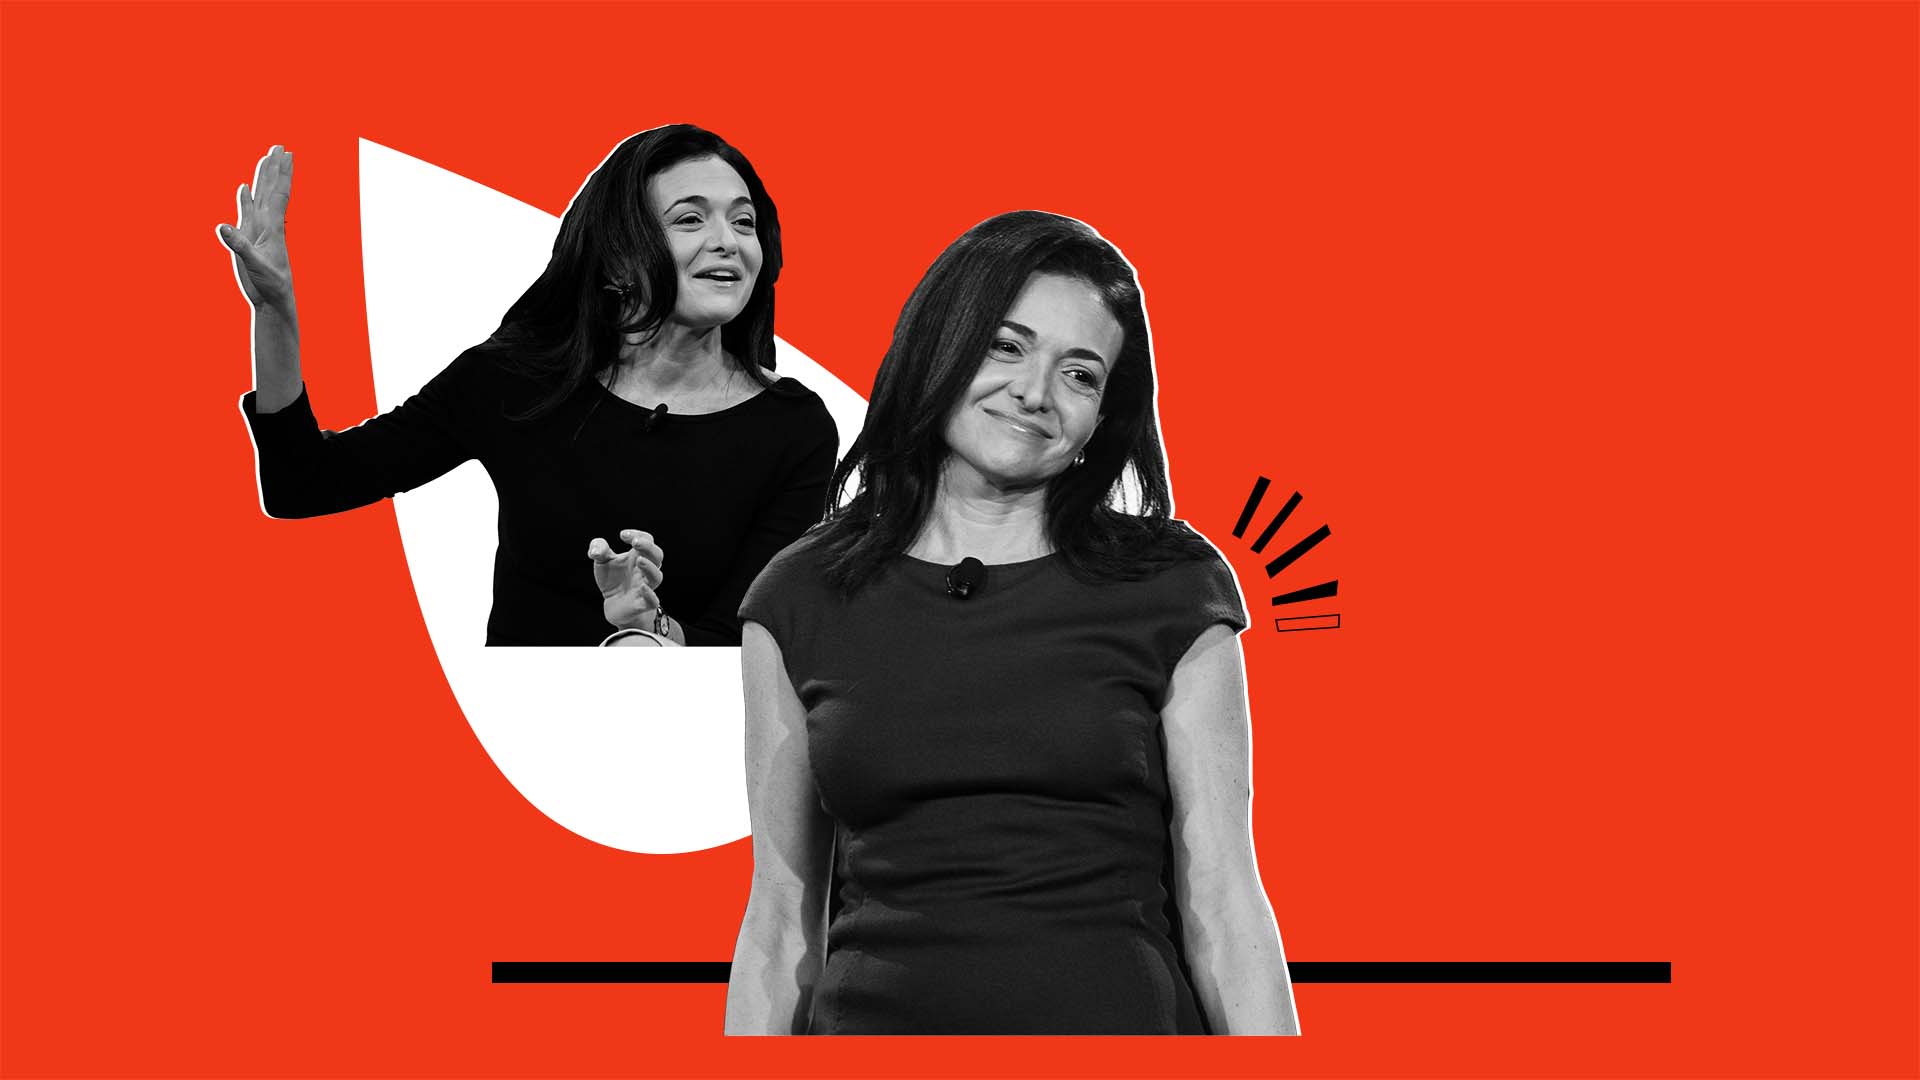 Facebook's Sheryl Sandberg Breaks Silence About Business Practices, Outage